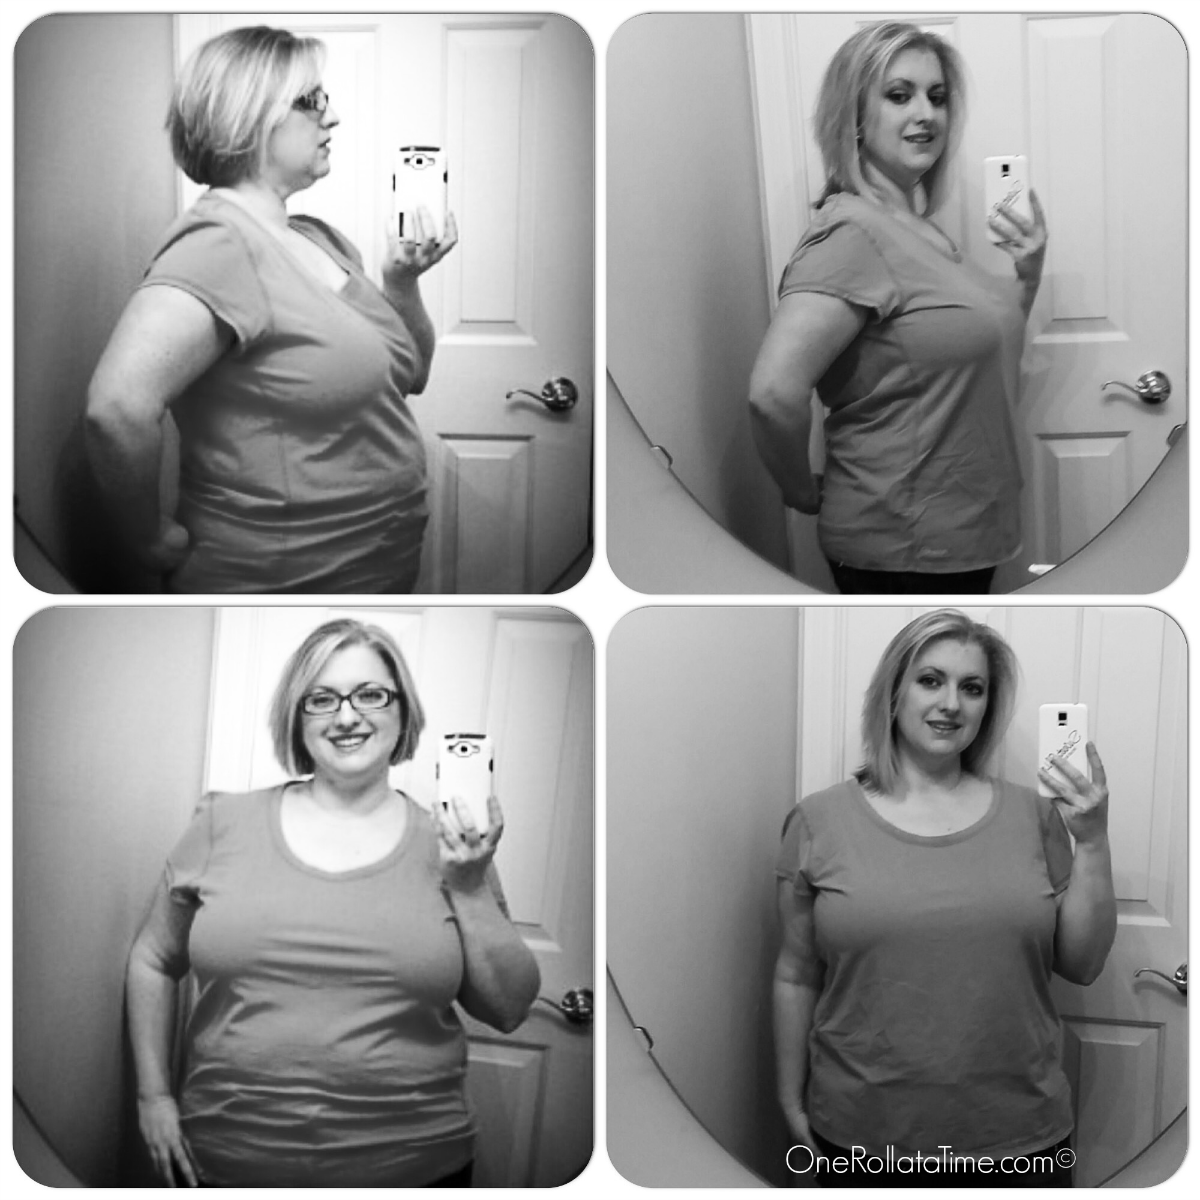 Down 31.2 Pounds & Counting - On My Way